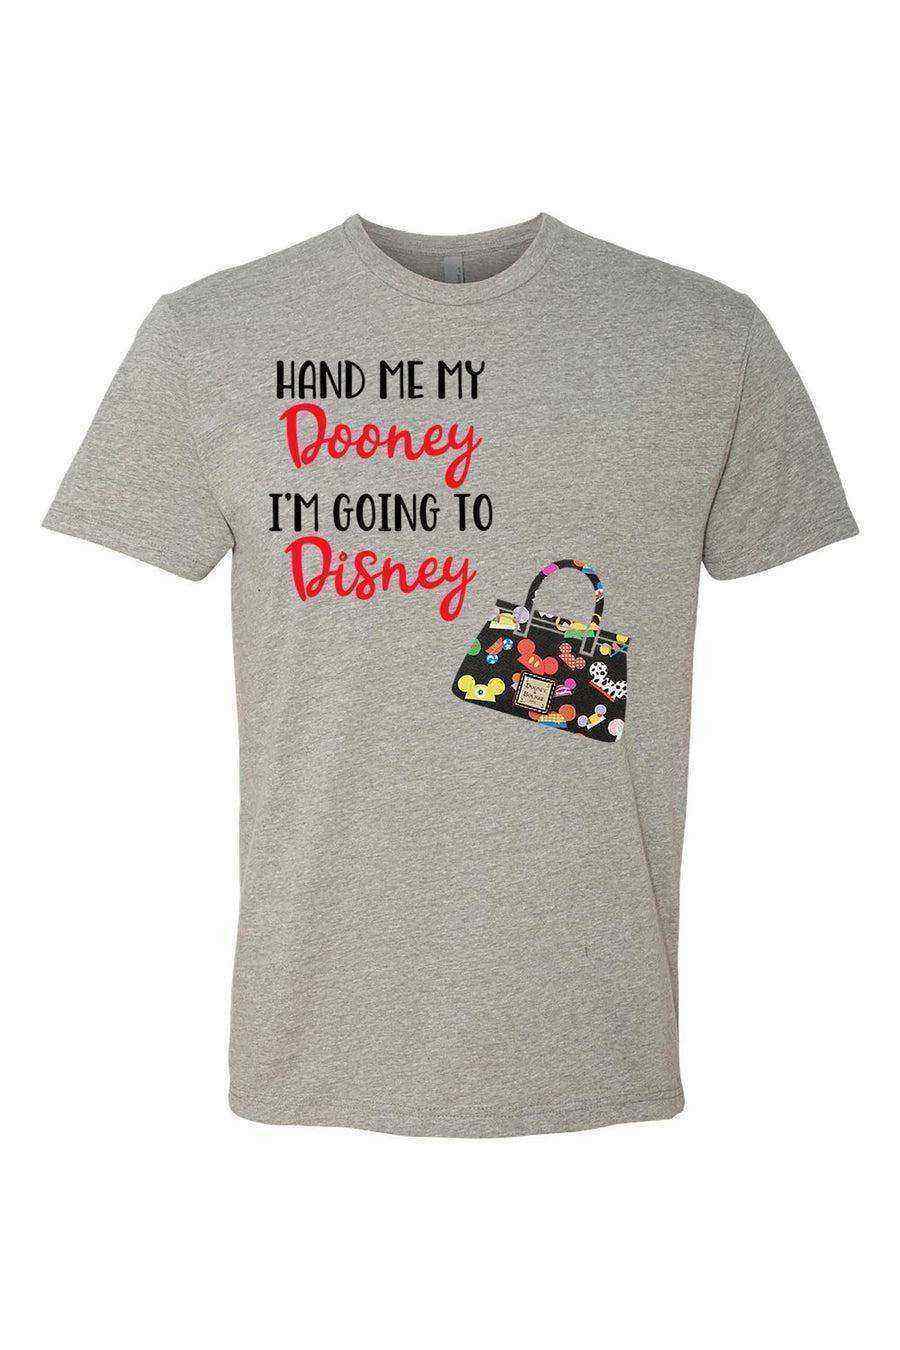 Youth | Hand Me My Dooney Im Going To Tee - Dylan's Tees